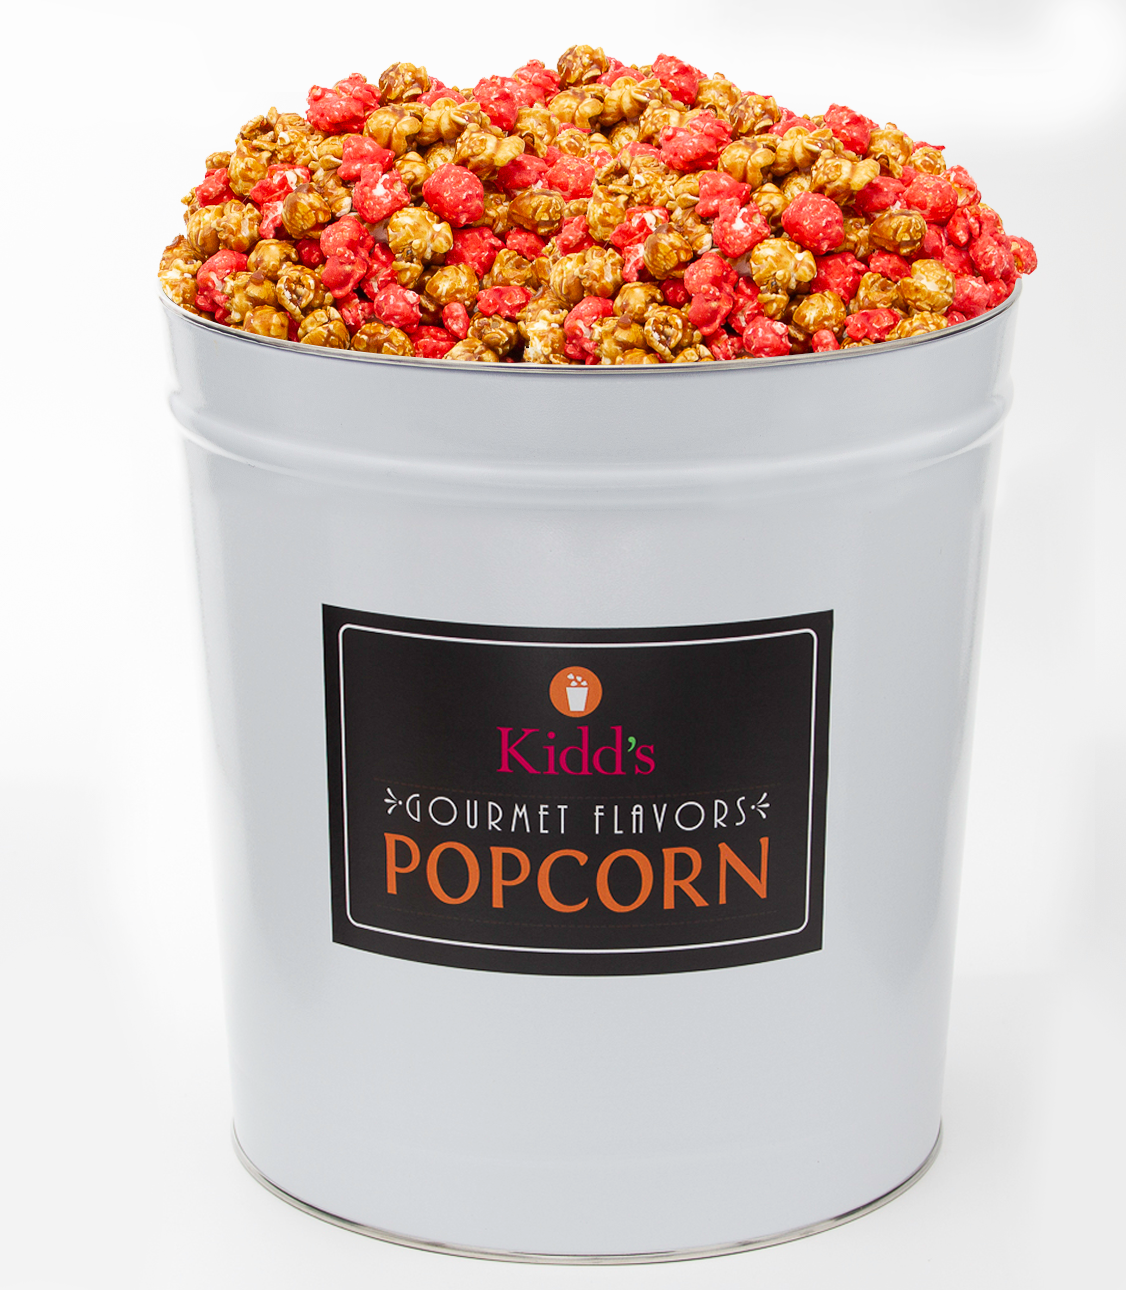 Fifty Percent Off Tins of our Signature White with black label Large popcorn Gift Tin. Filled with RedHots Cinnamon candy popcorn and mouthwatering caramel corn.